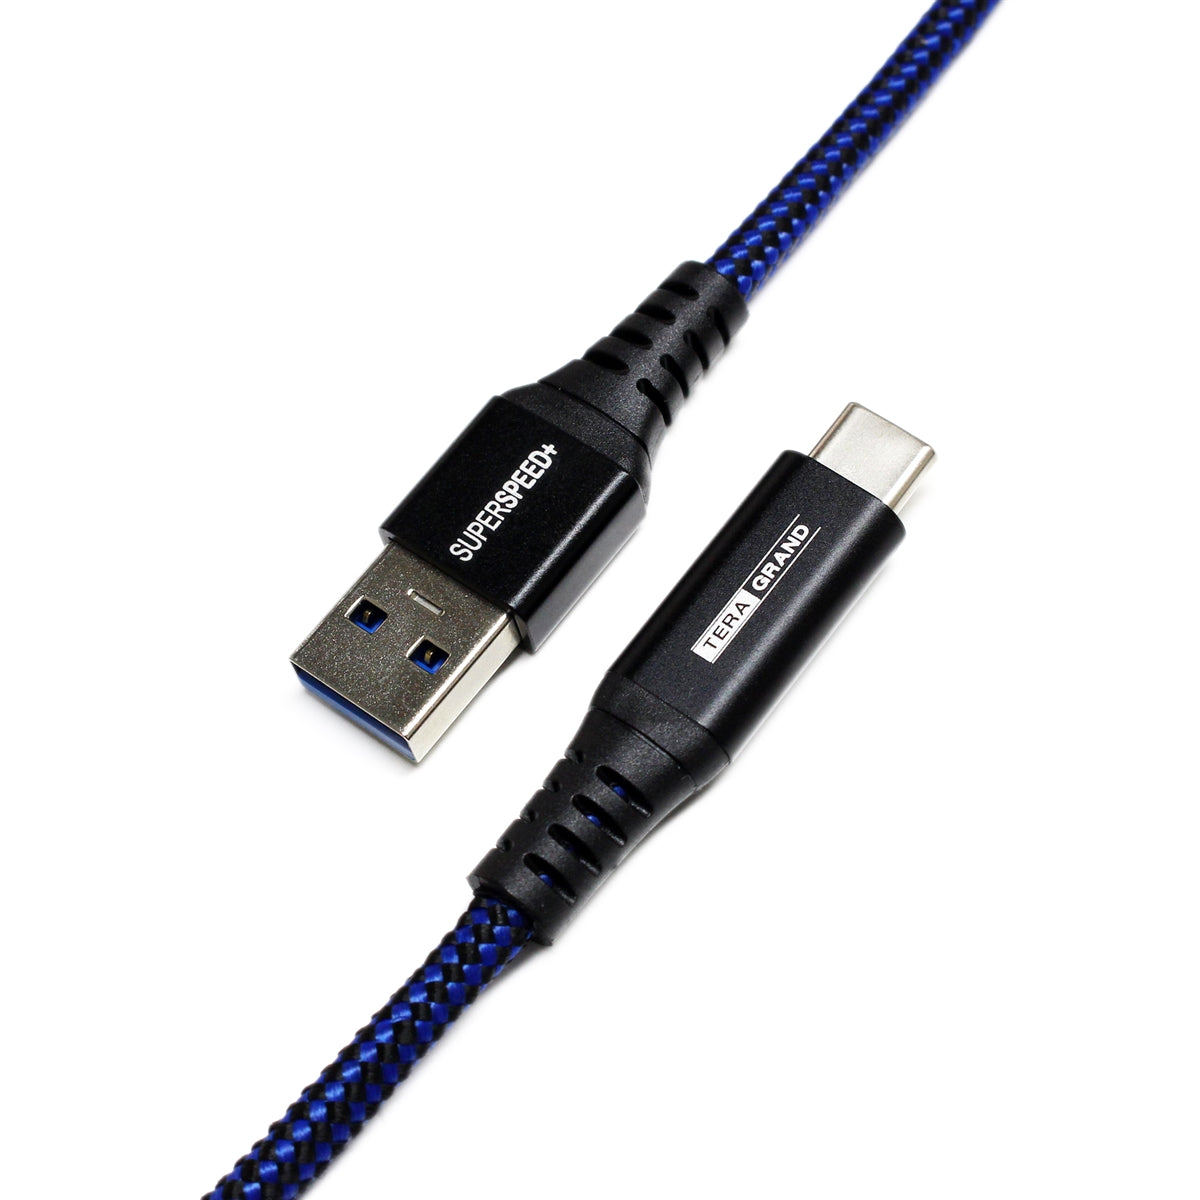 USB 3.0 to SATA 3.0 Adapter Cable with US Power Adapter — Tera Grand